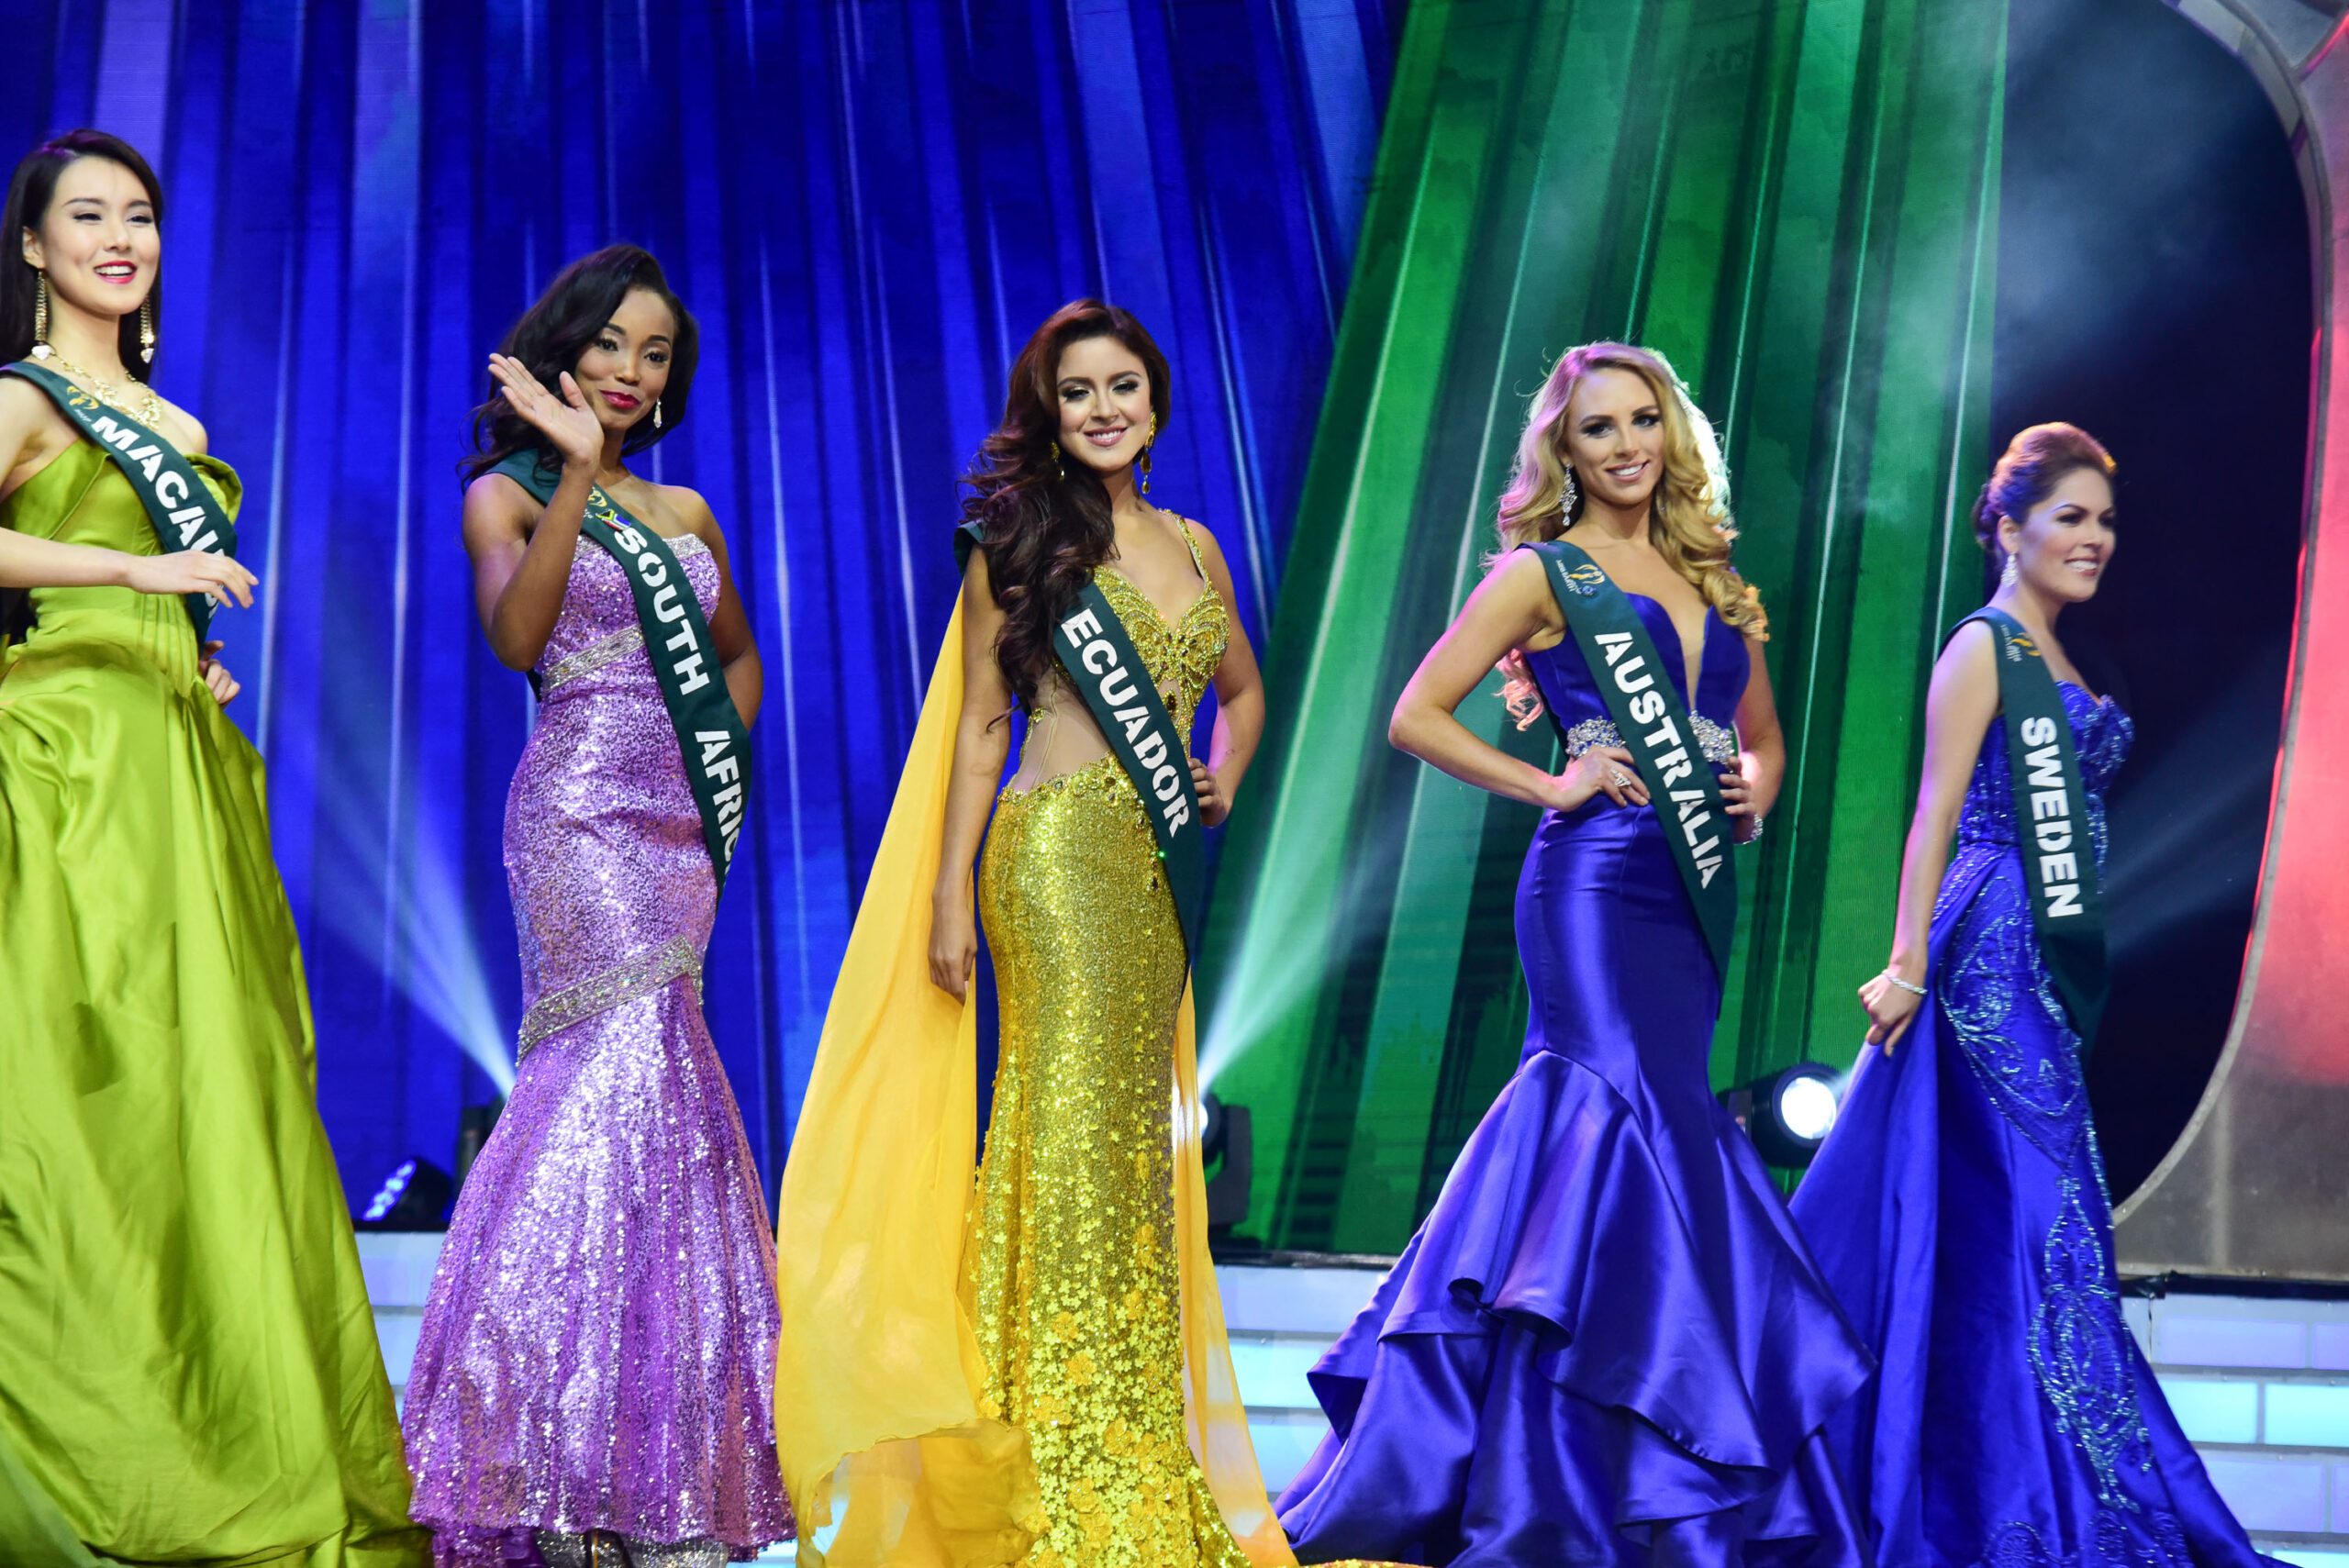 WATCH: Miss Earth 2016 evening gown competition